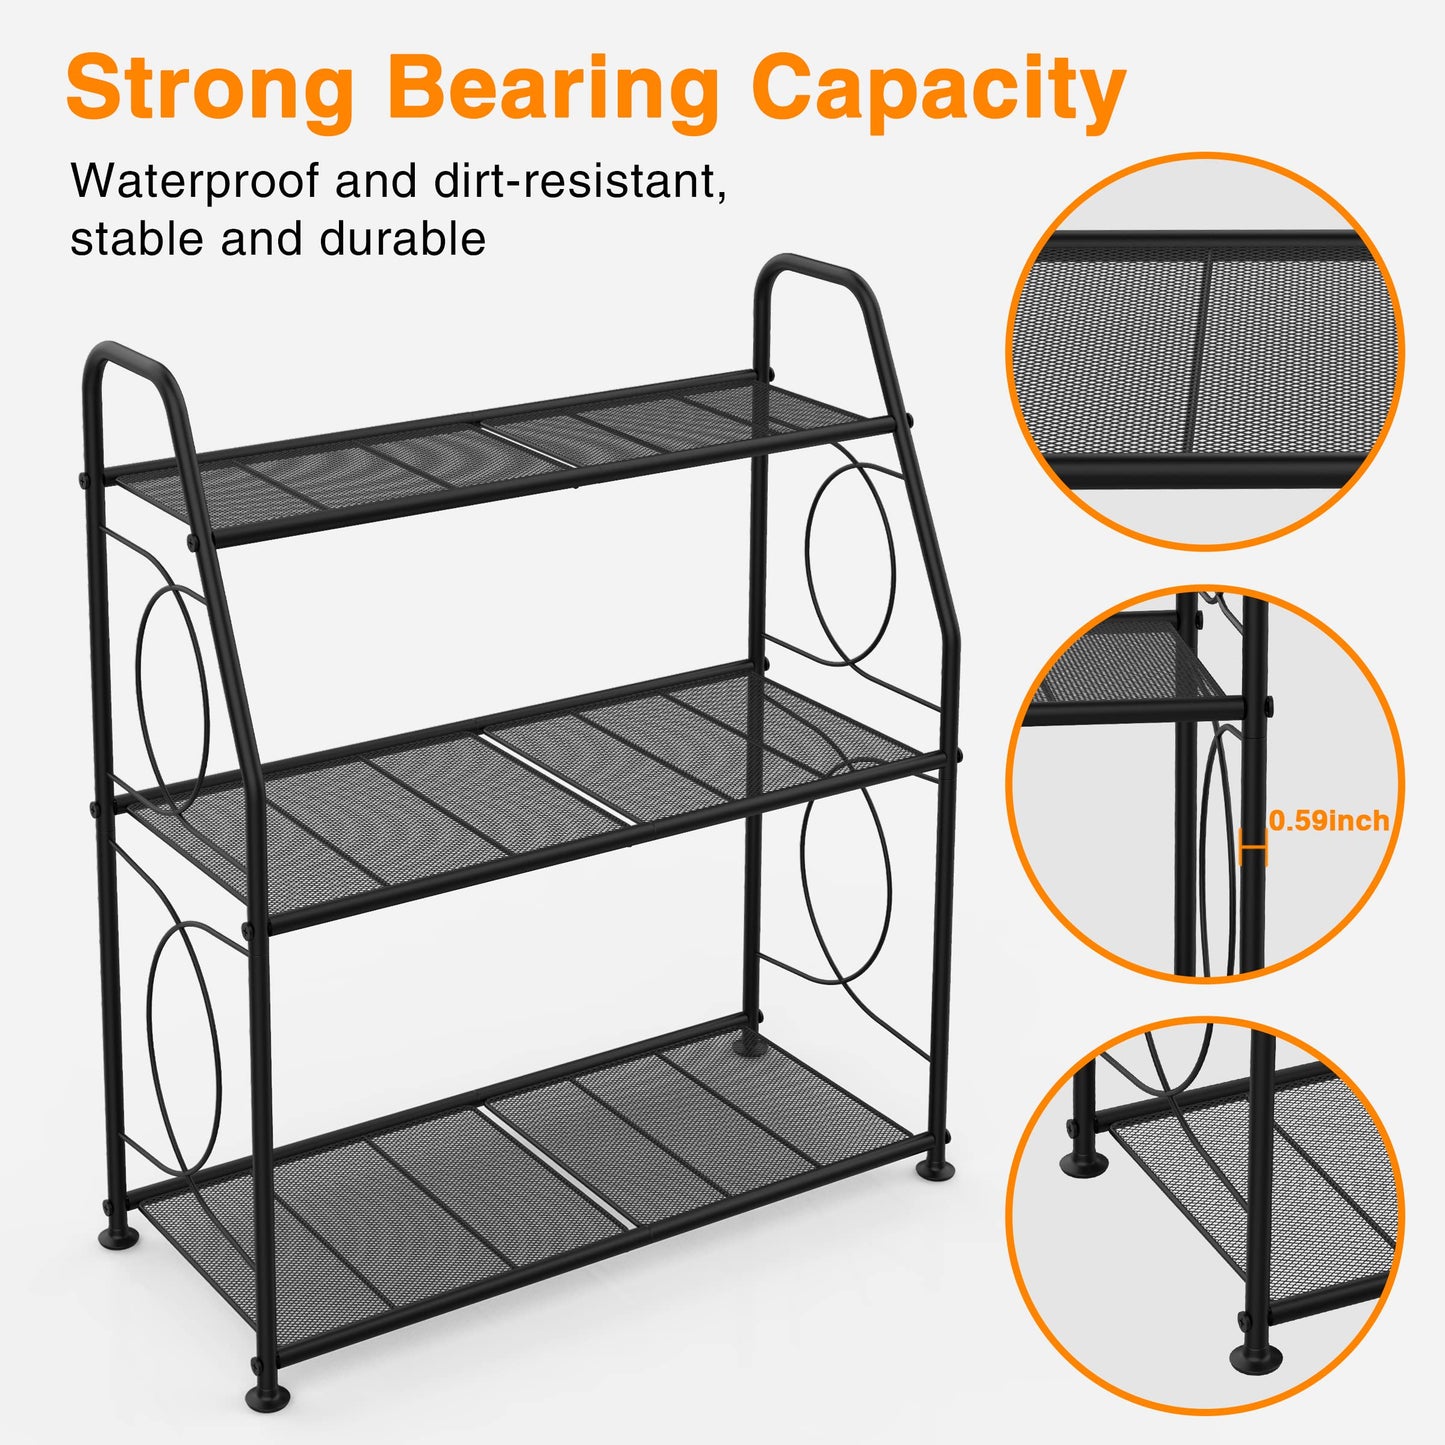 VyGrow Plant Stand, 3 Tier Plant Shelf for Indoor Outdoor, Heavy Duty Metal Outdoor Plant Stand Holder Rack for Living Room Balcony and Garden, Black